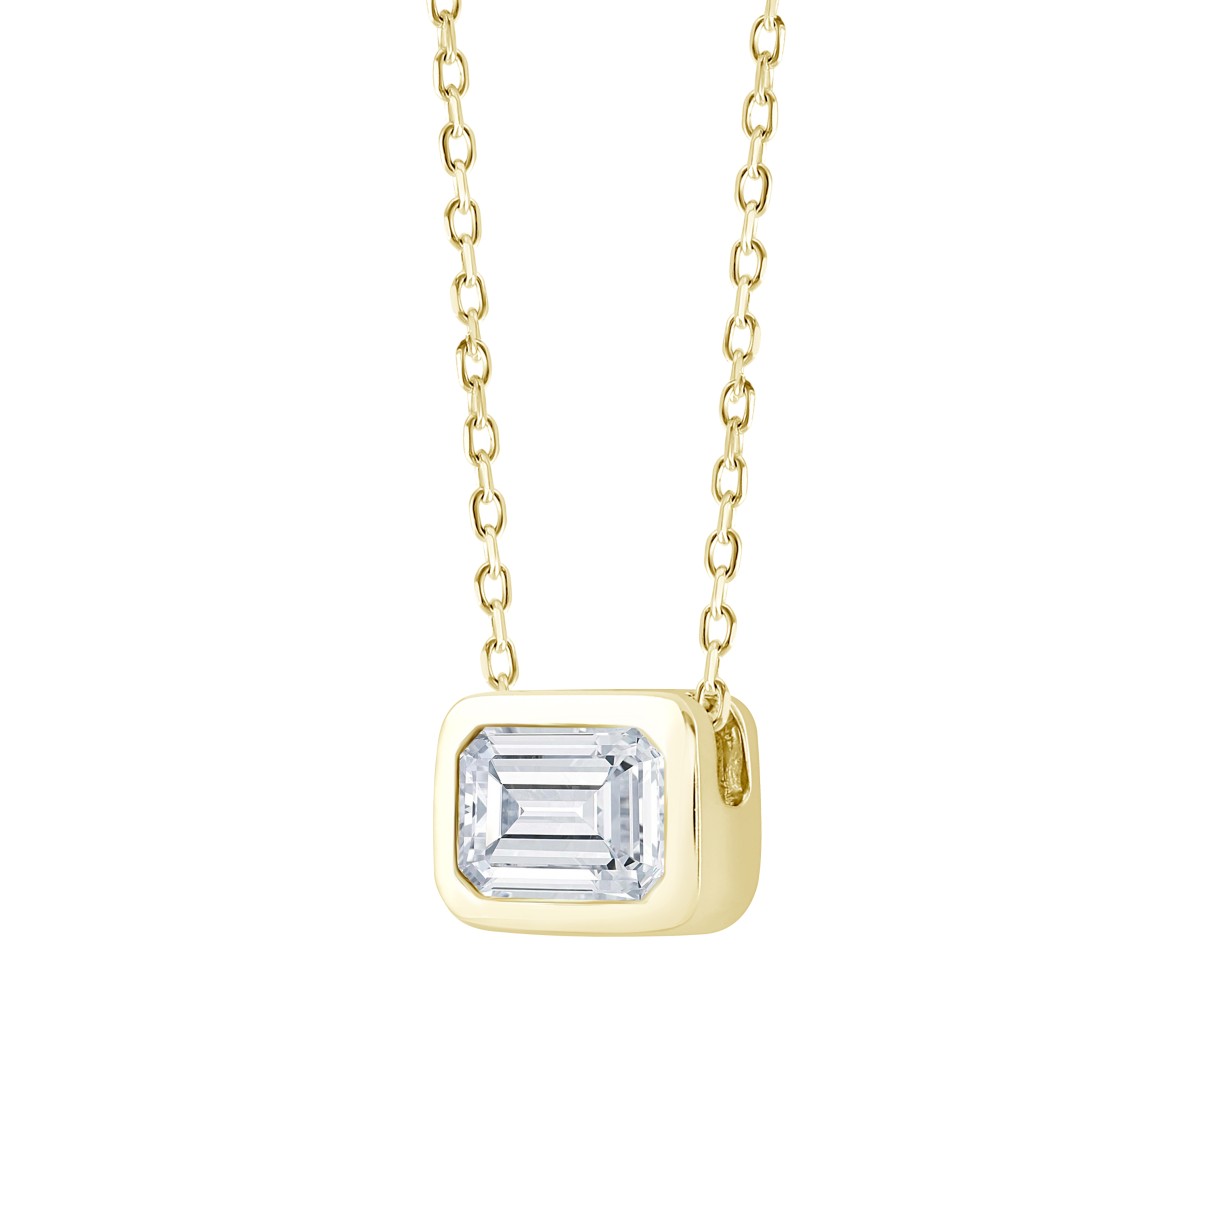 LADIES SOLITAIRE PENDANT 1CT EMERALD DIAMOND 14K YELLOW GOLD WITH CHAIN